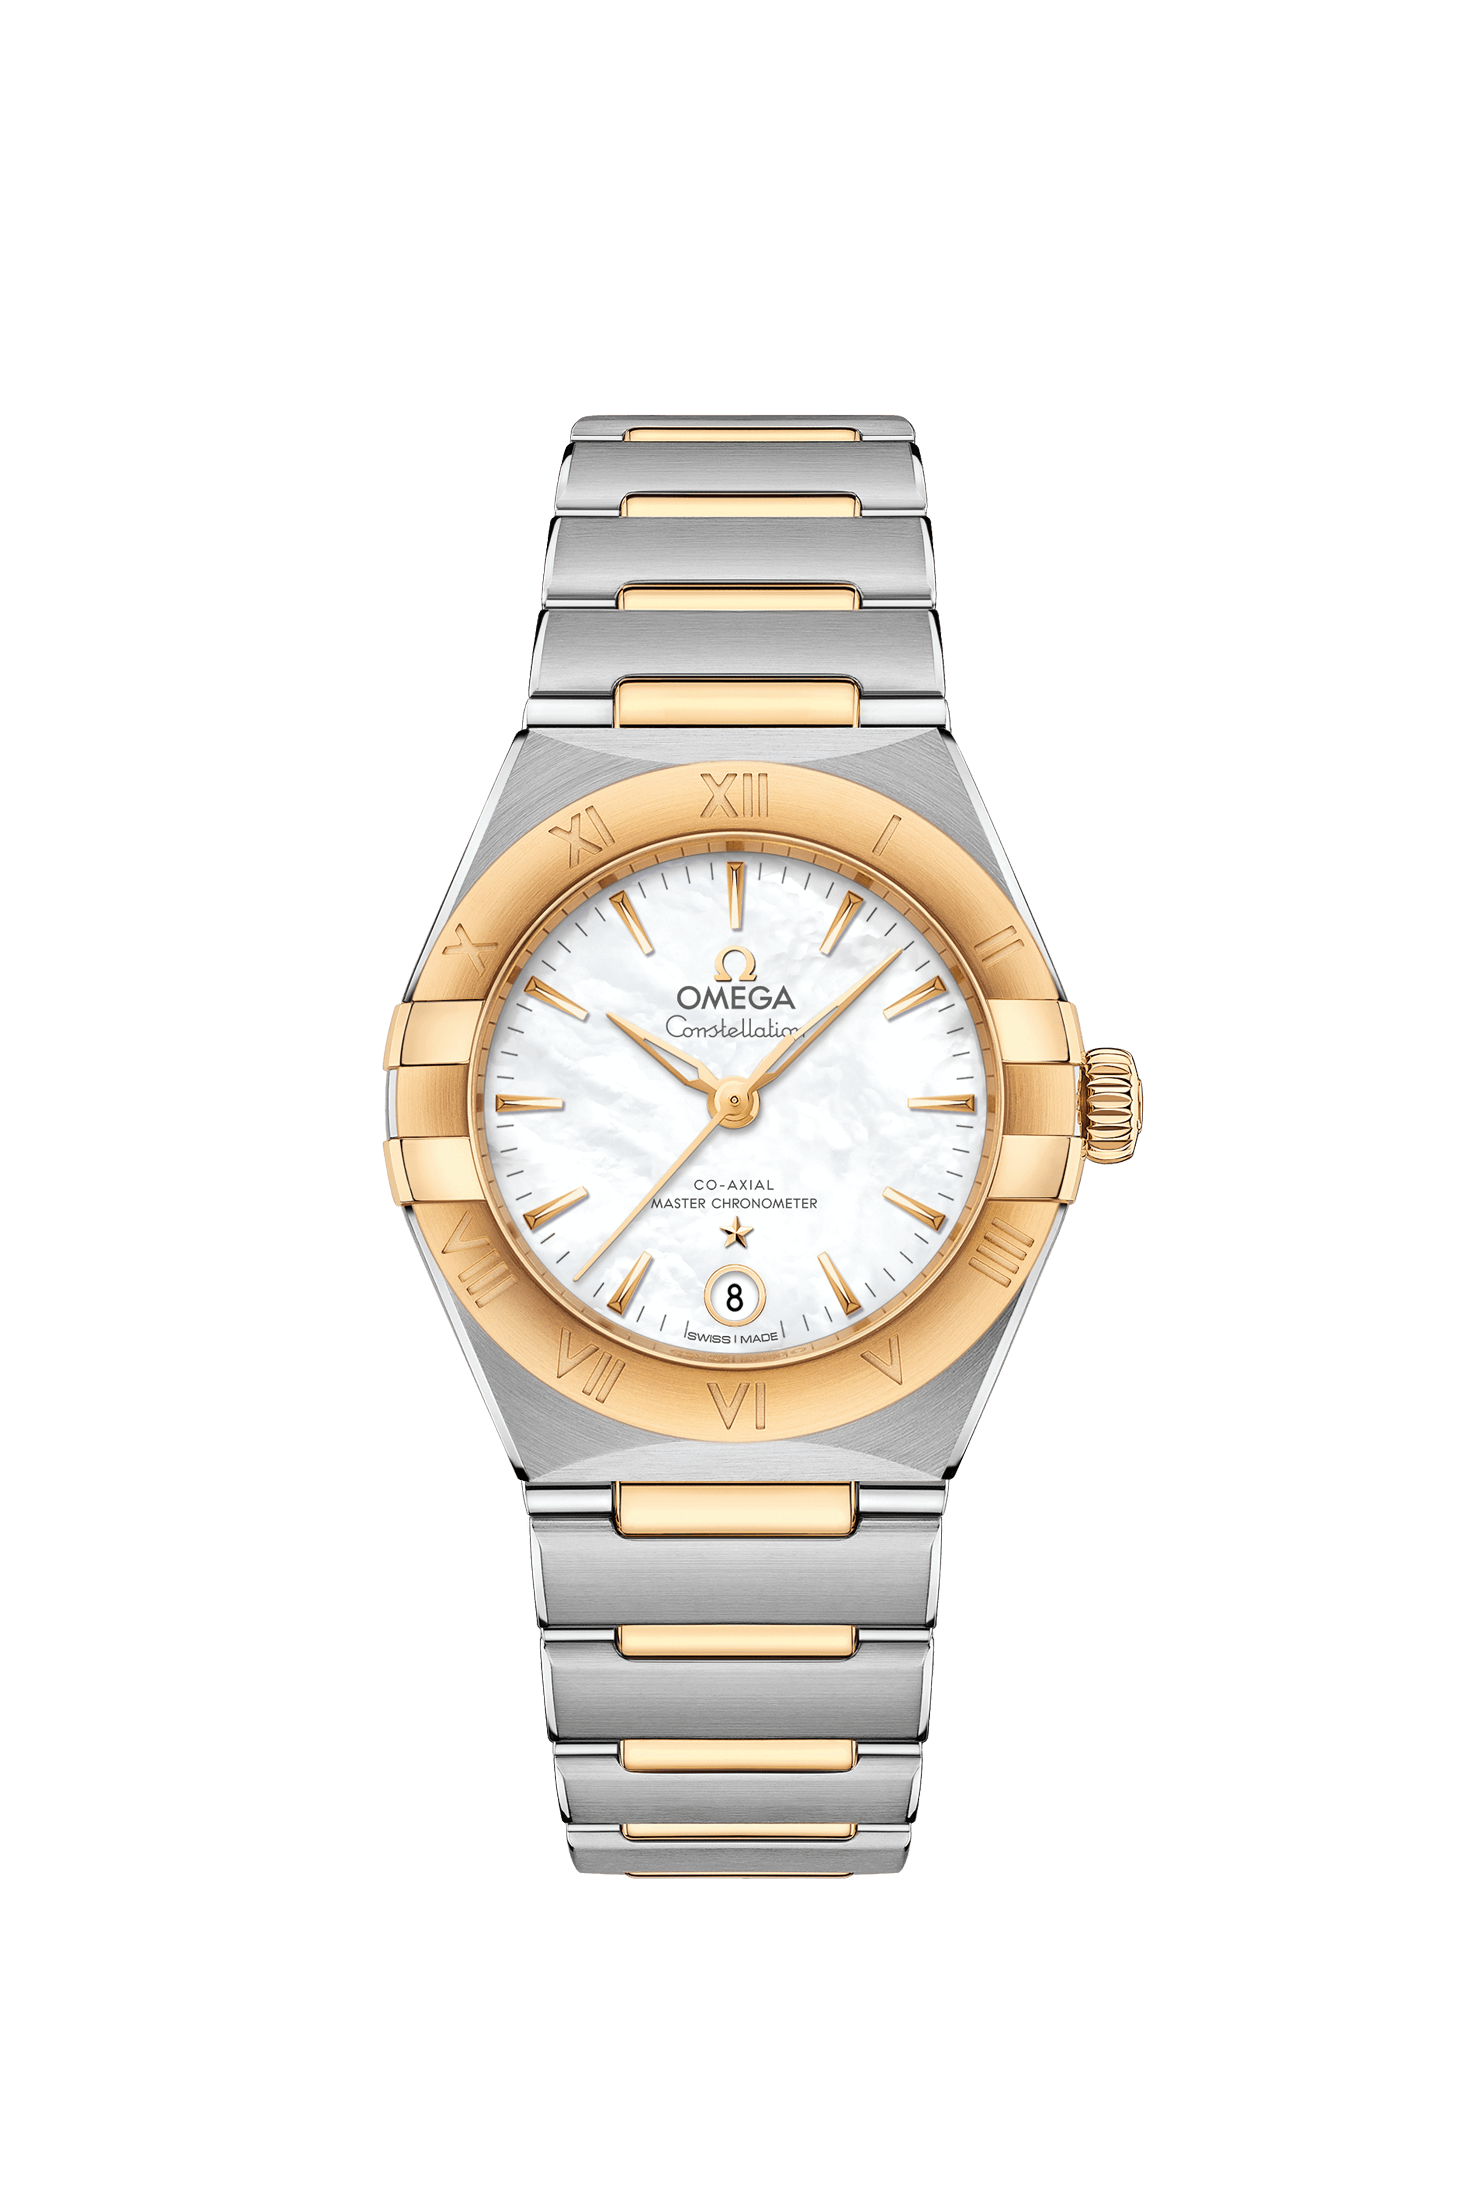 Ladies' watch  OMEGA, Constellation Co Axial Master Chronometer / 29mm, SKU: 131.20.29.20.05.002 | watchphilosophy.co.uk